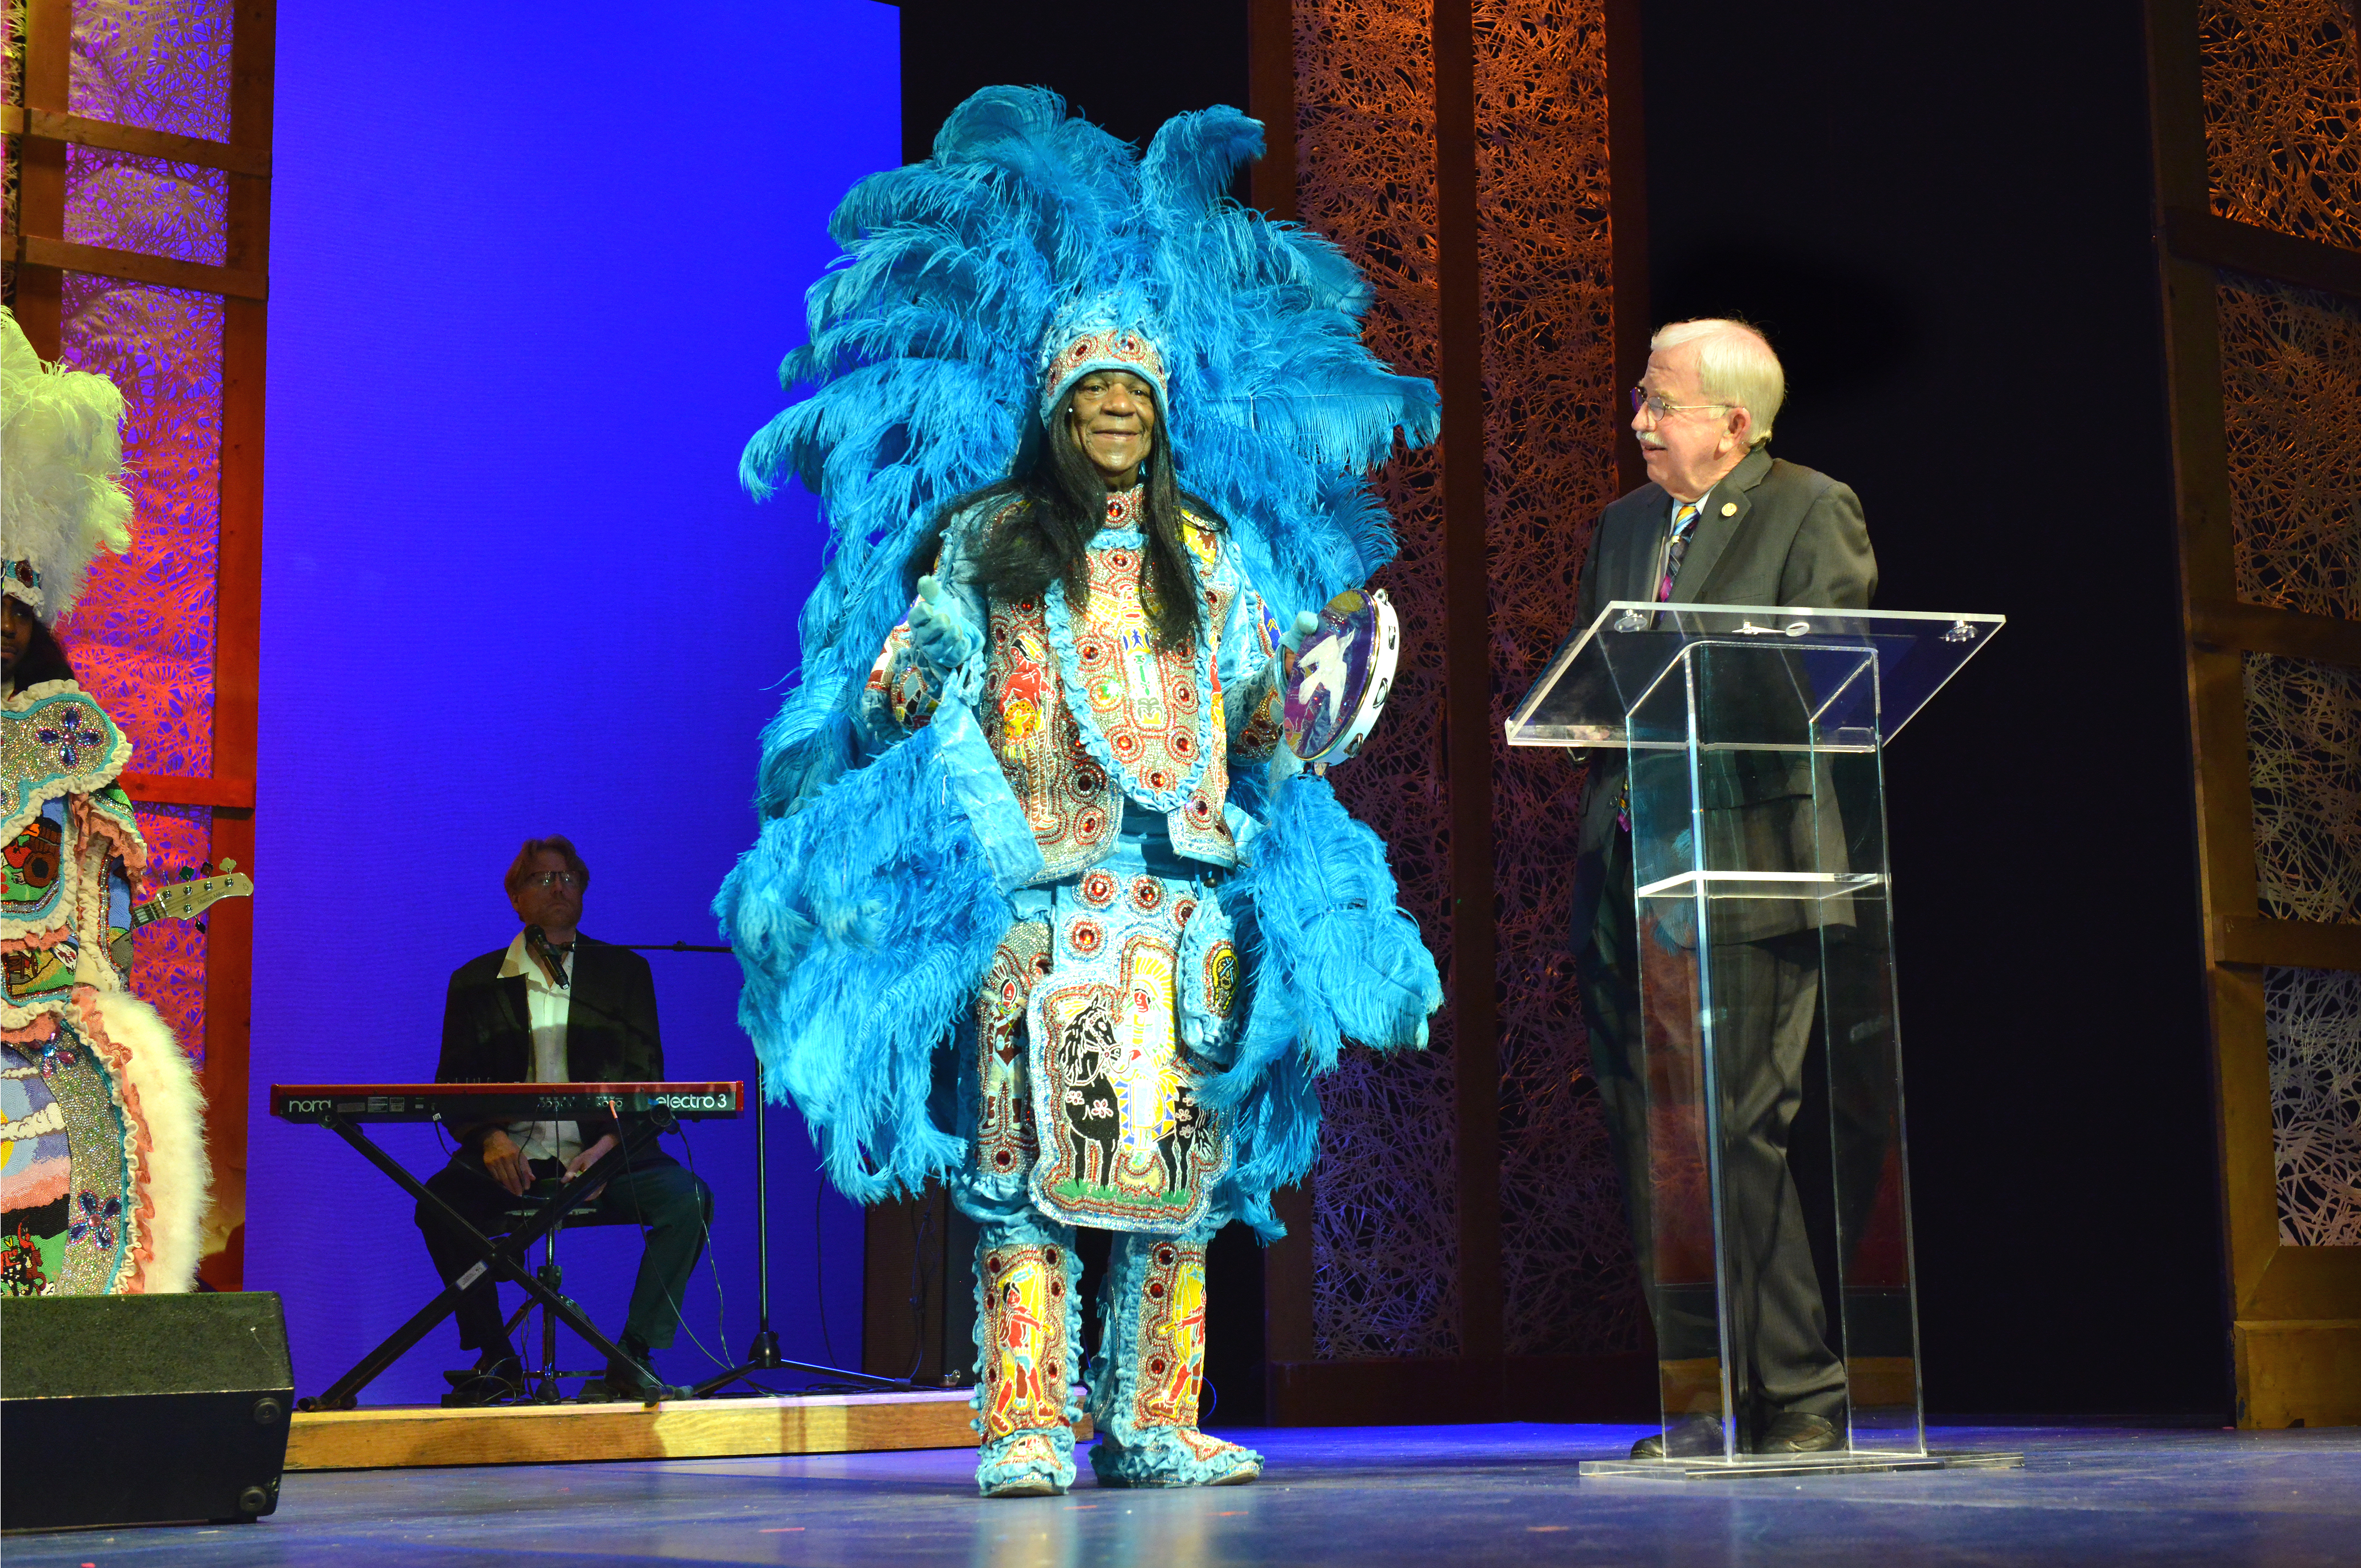 Honoree wearing elaborate custom with feathers and sequins. He is standing with emcee and talking. 